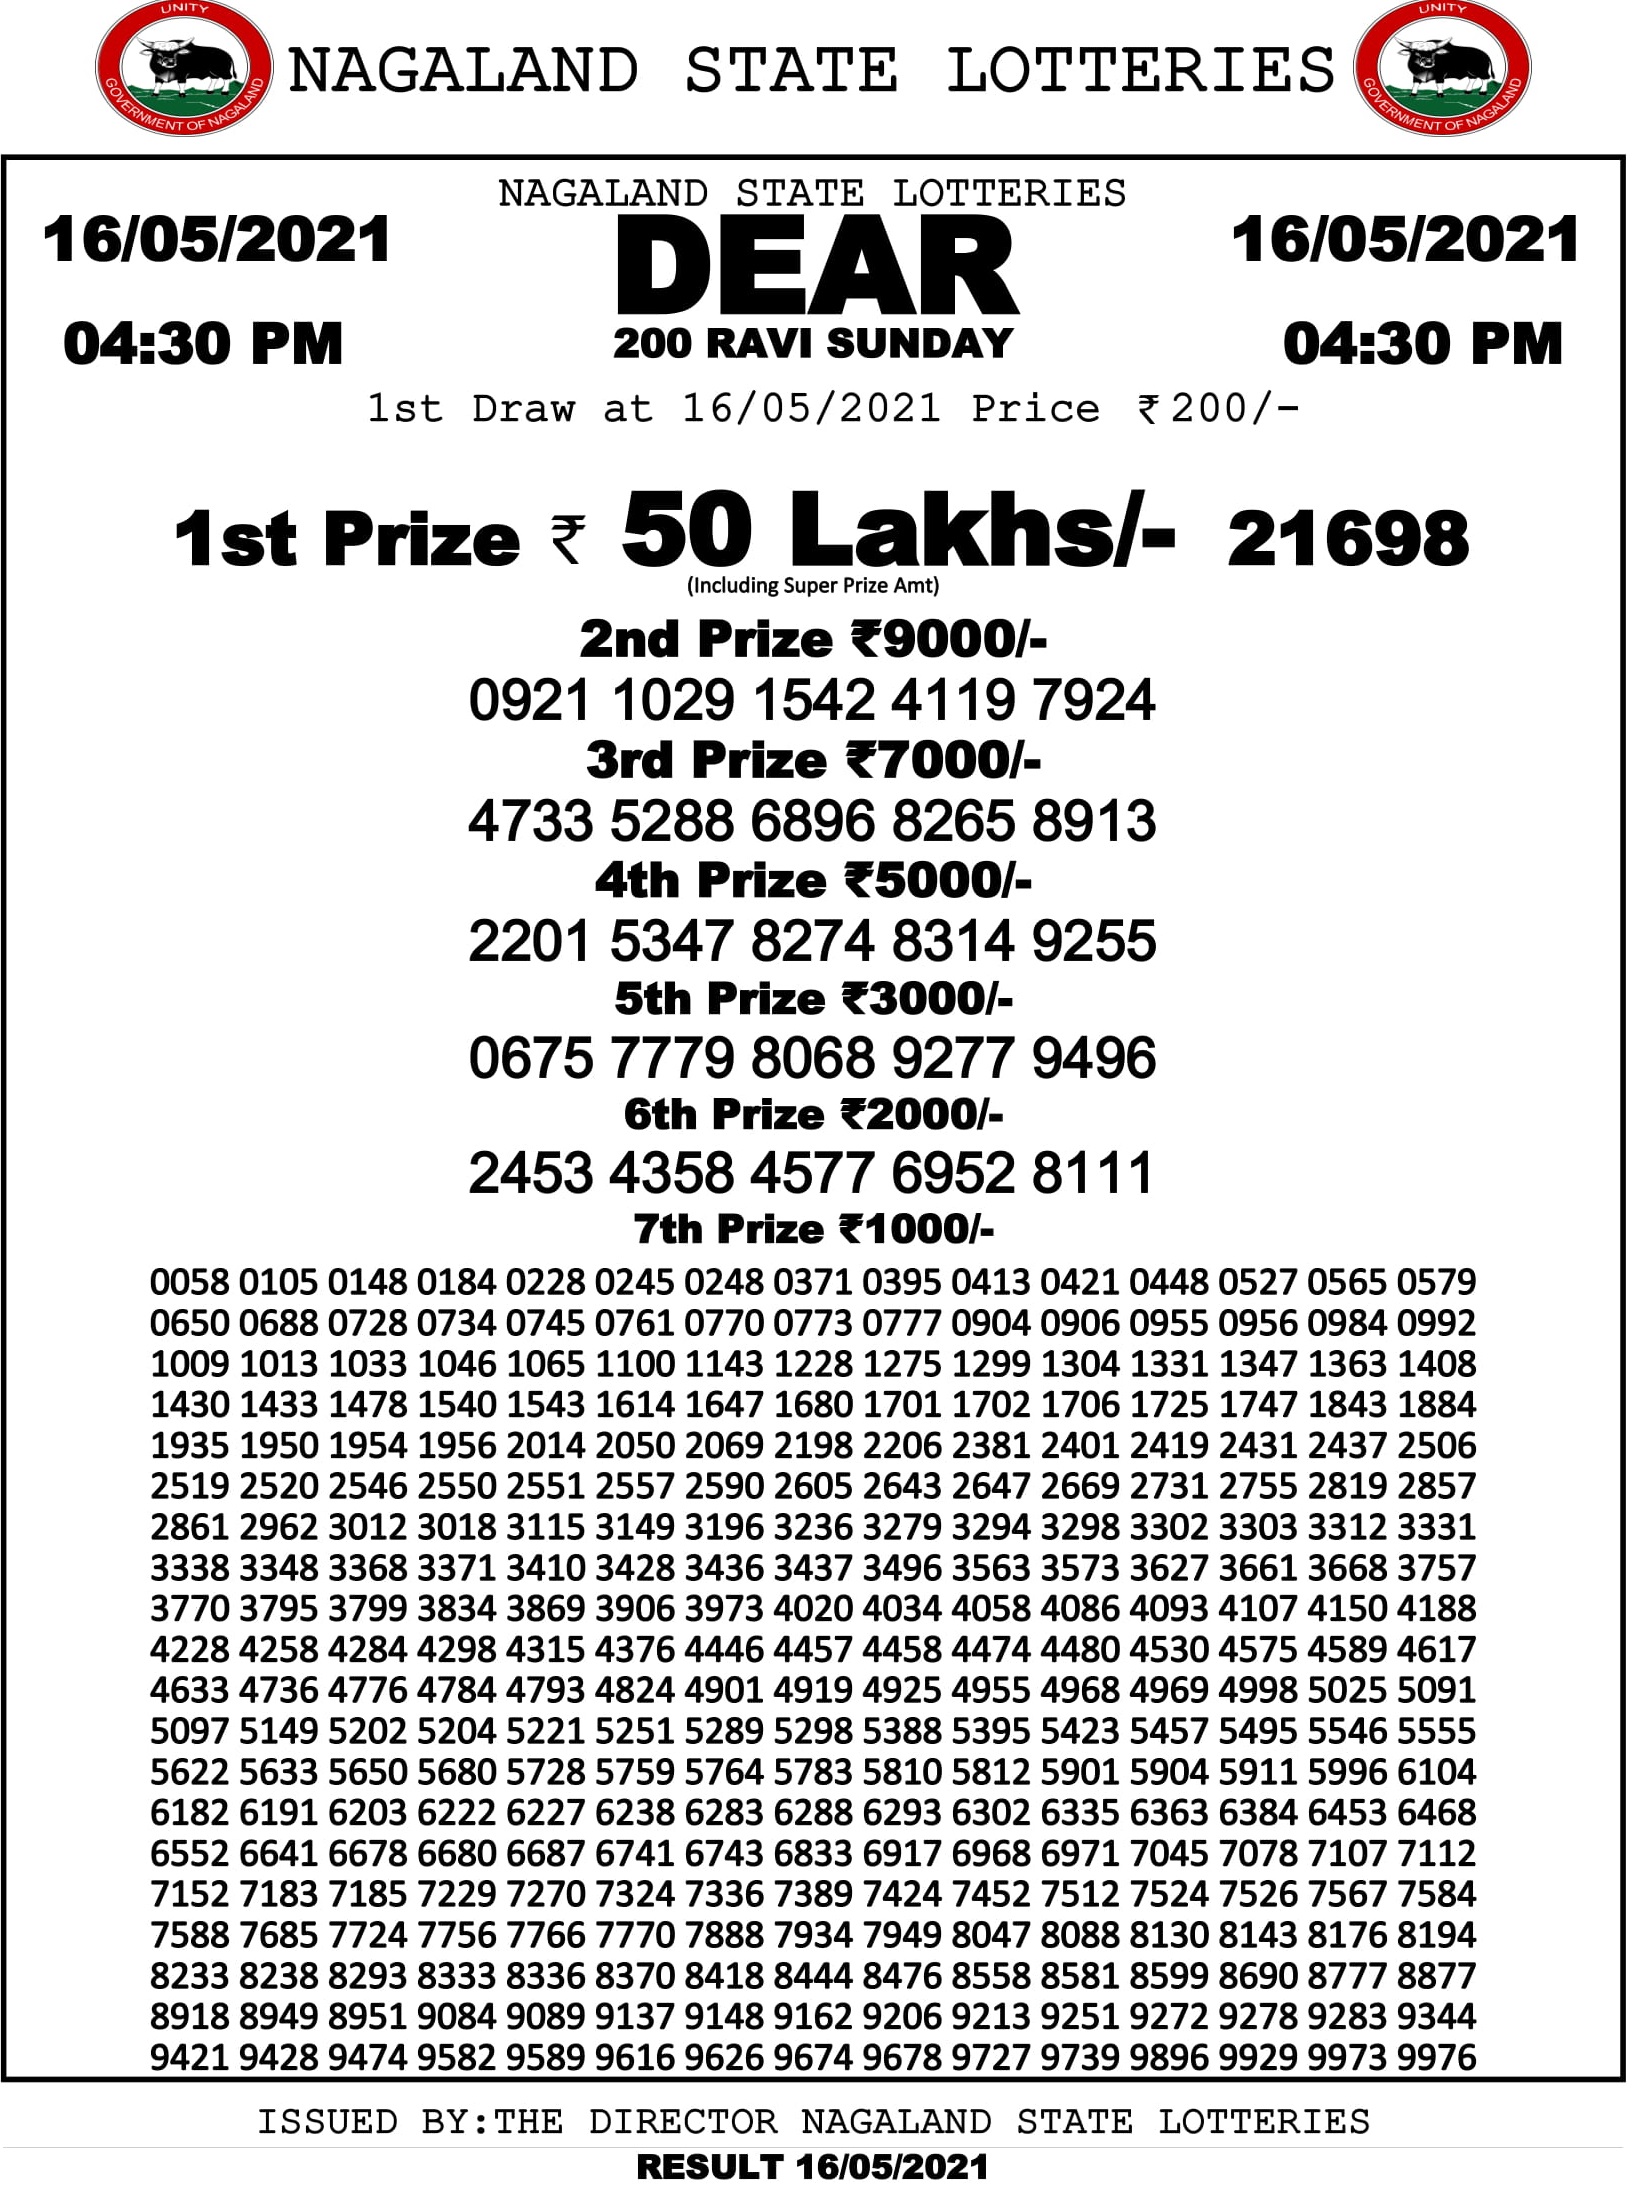 Nagaland Lottery DEAR 200 Weekly Ressult 16.5.2021